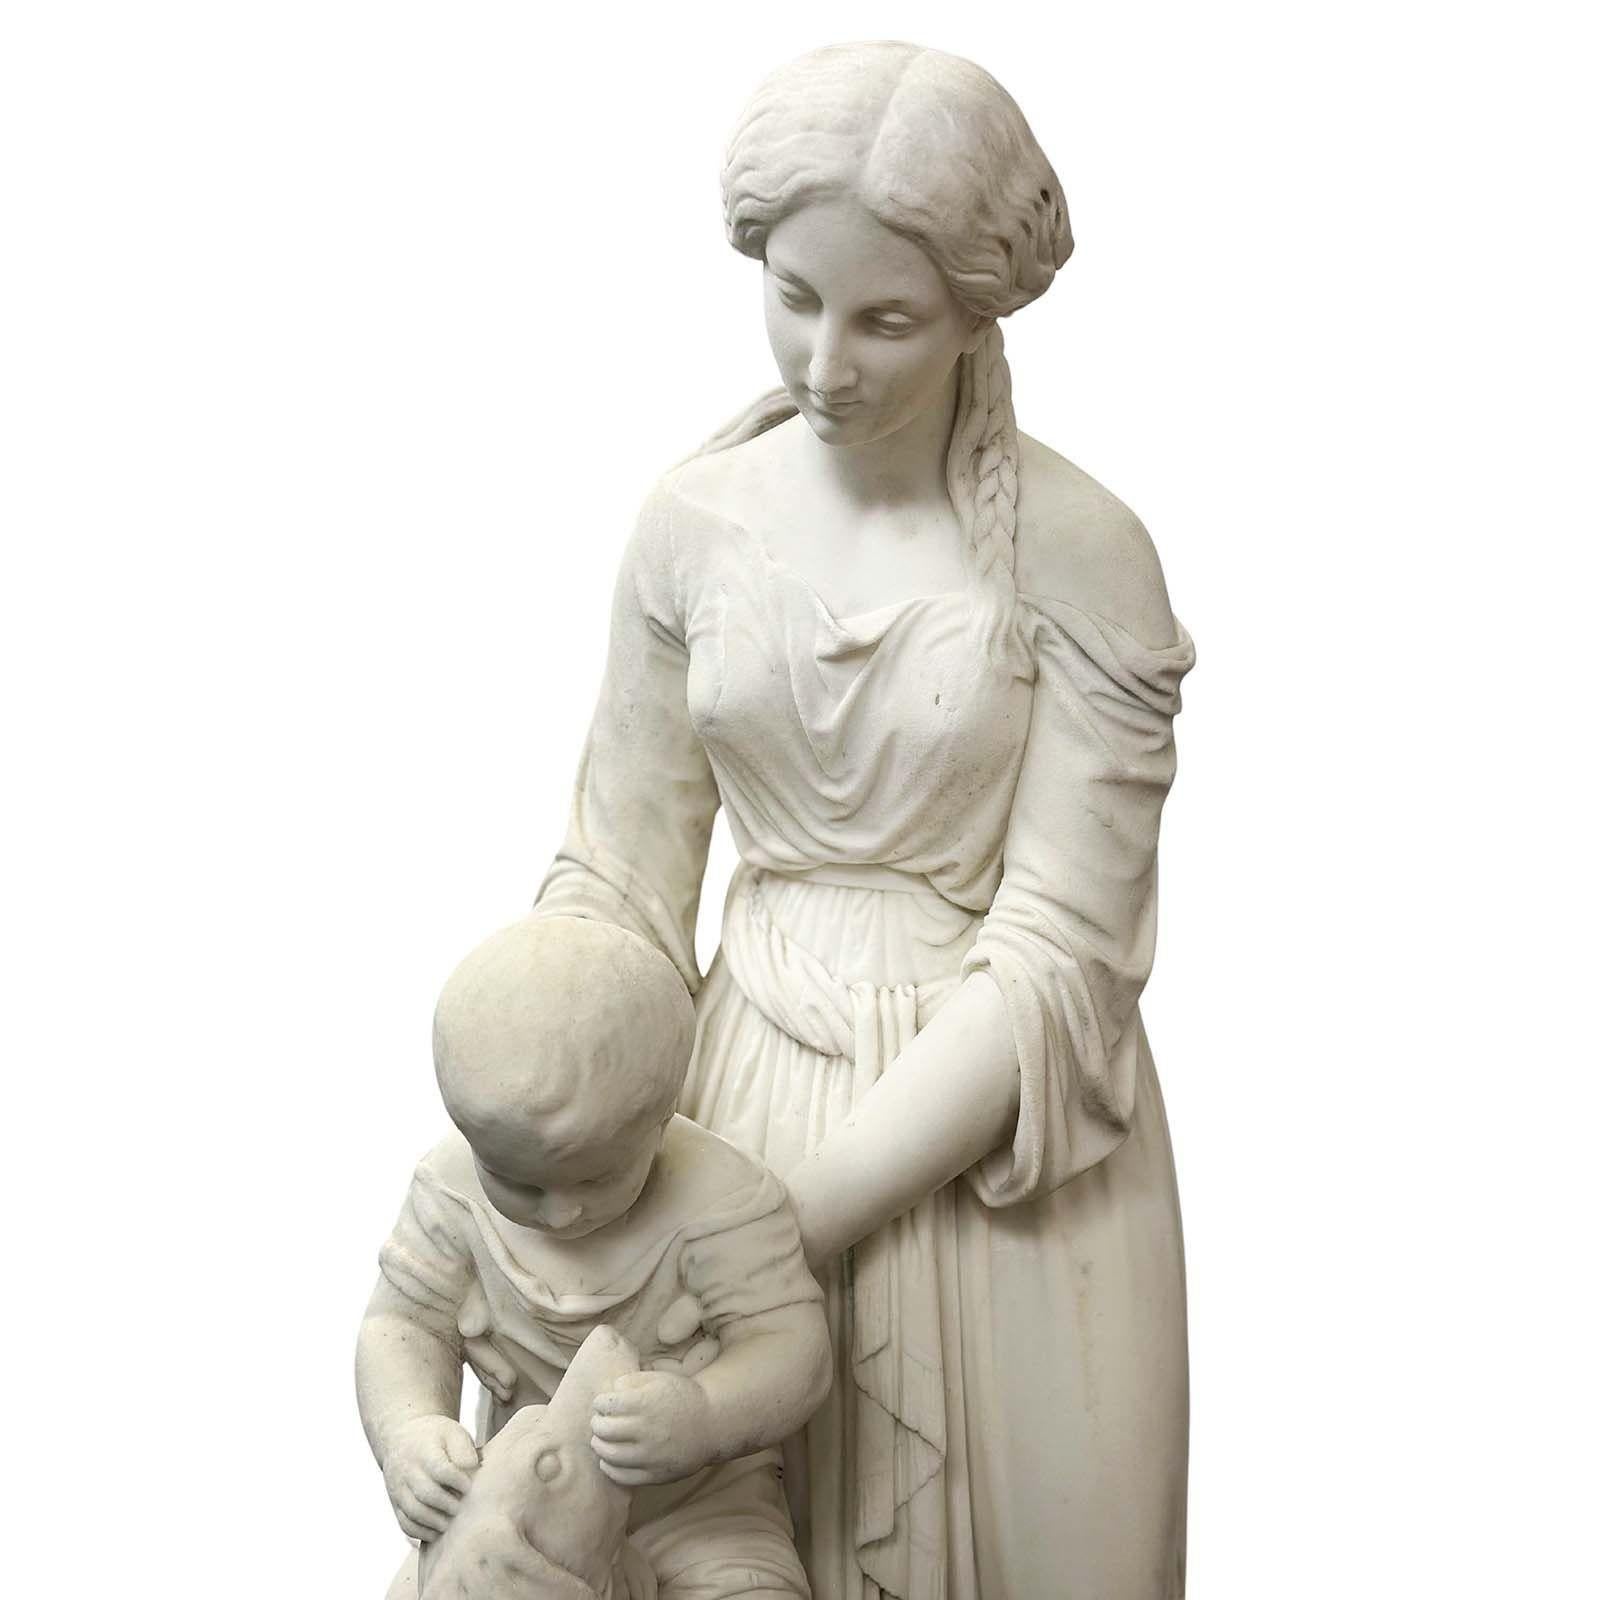 Charming white marble sculpture made in Italy in the 19th Century. The central focus is a graceful mother, draped in traditional attire and a beautiful braid adorning her hair; who is gently holding her young son. The child, seated on the back of a